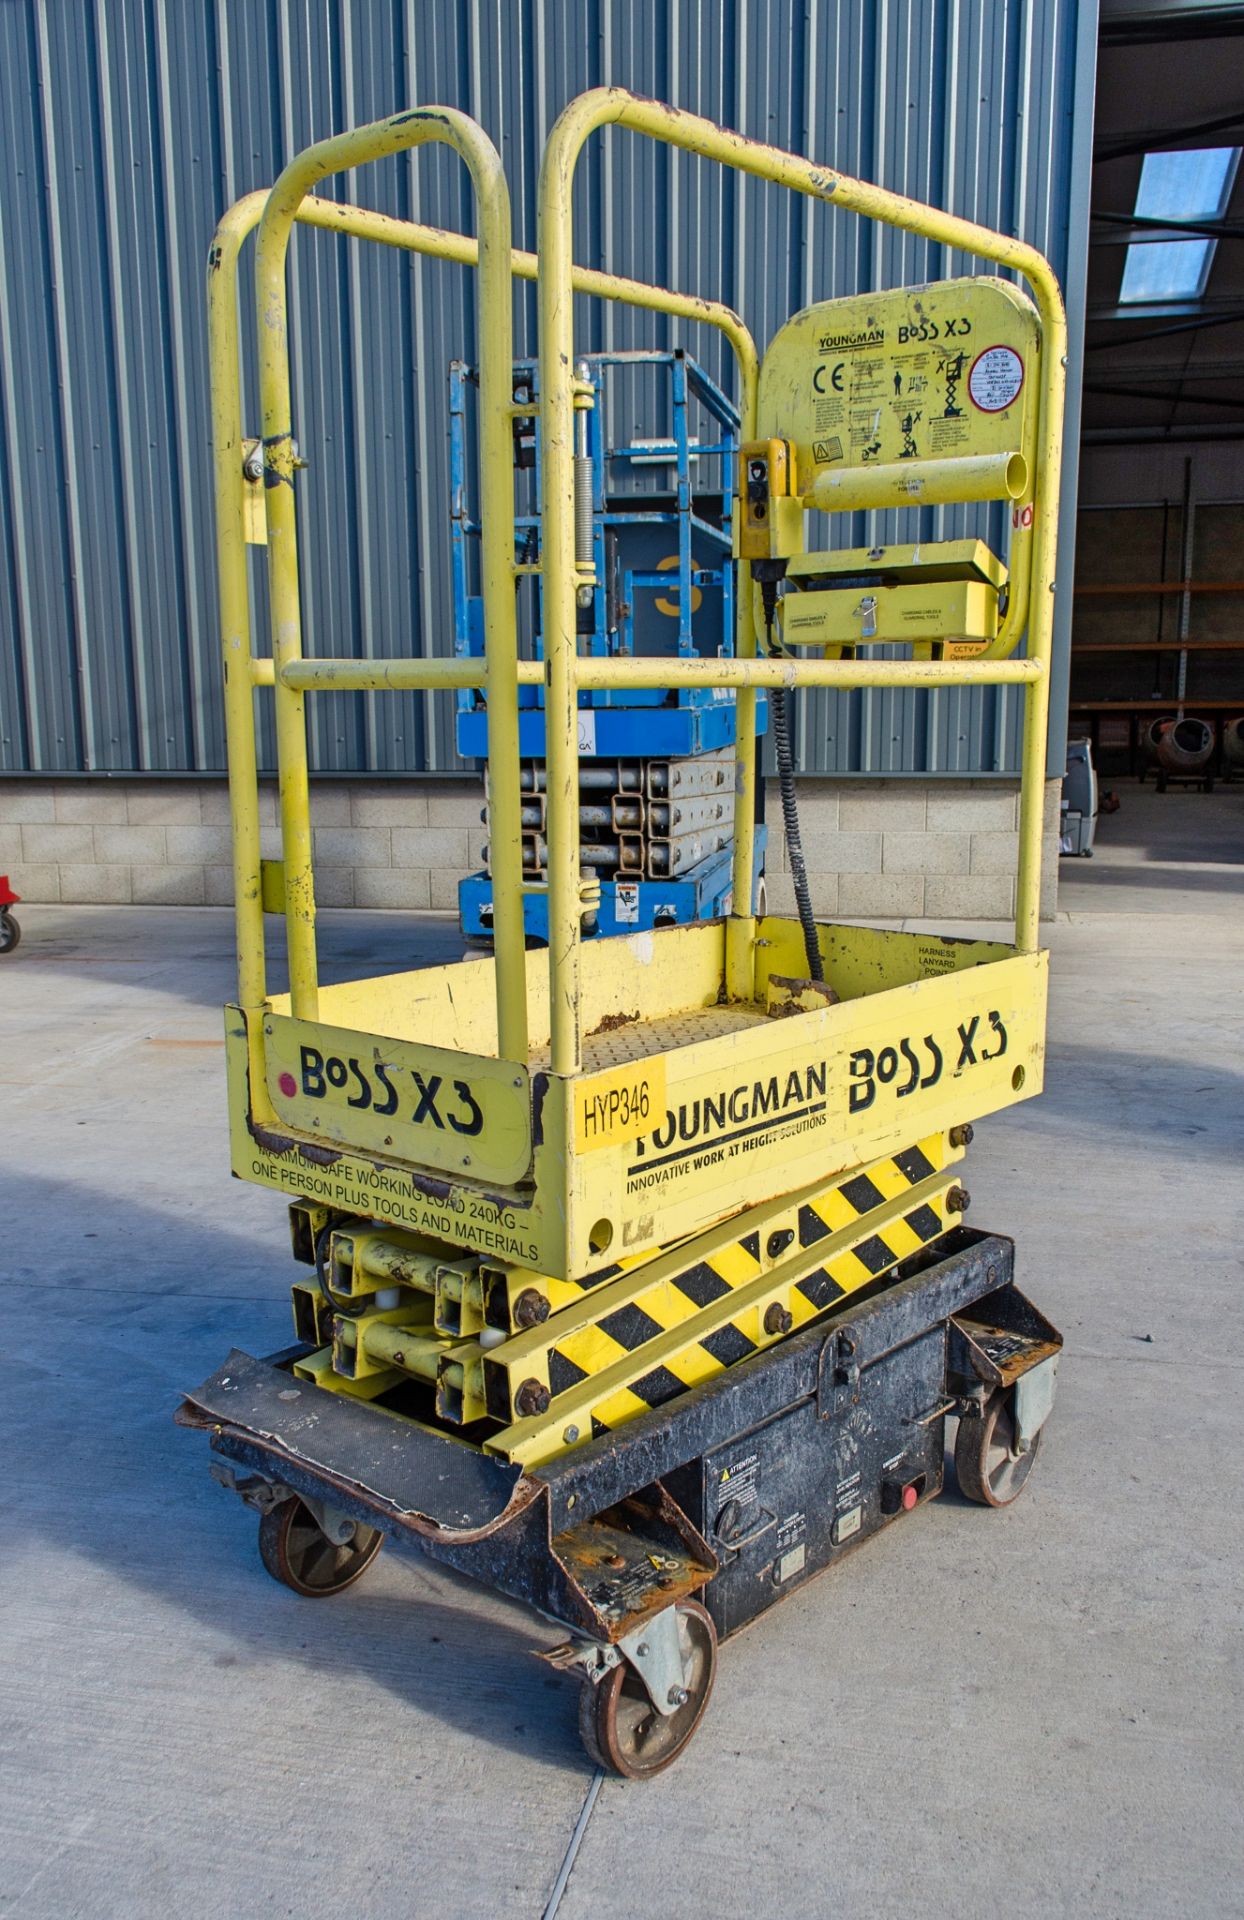 Youngman Boss X3 battery electric push around access platform Year: 2013 S/N: 12112 HYP346 - Image 3 of 6